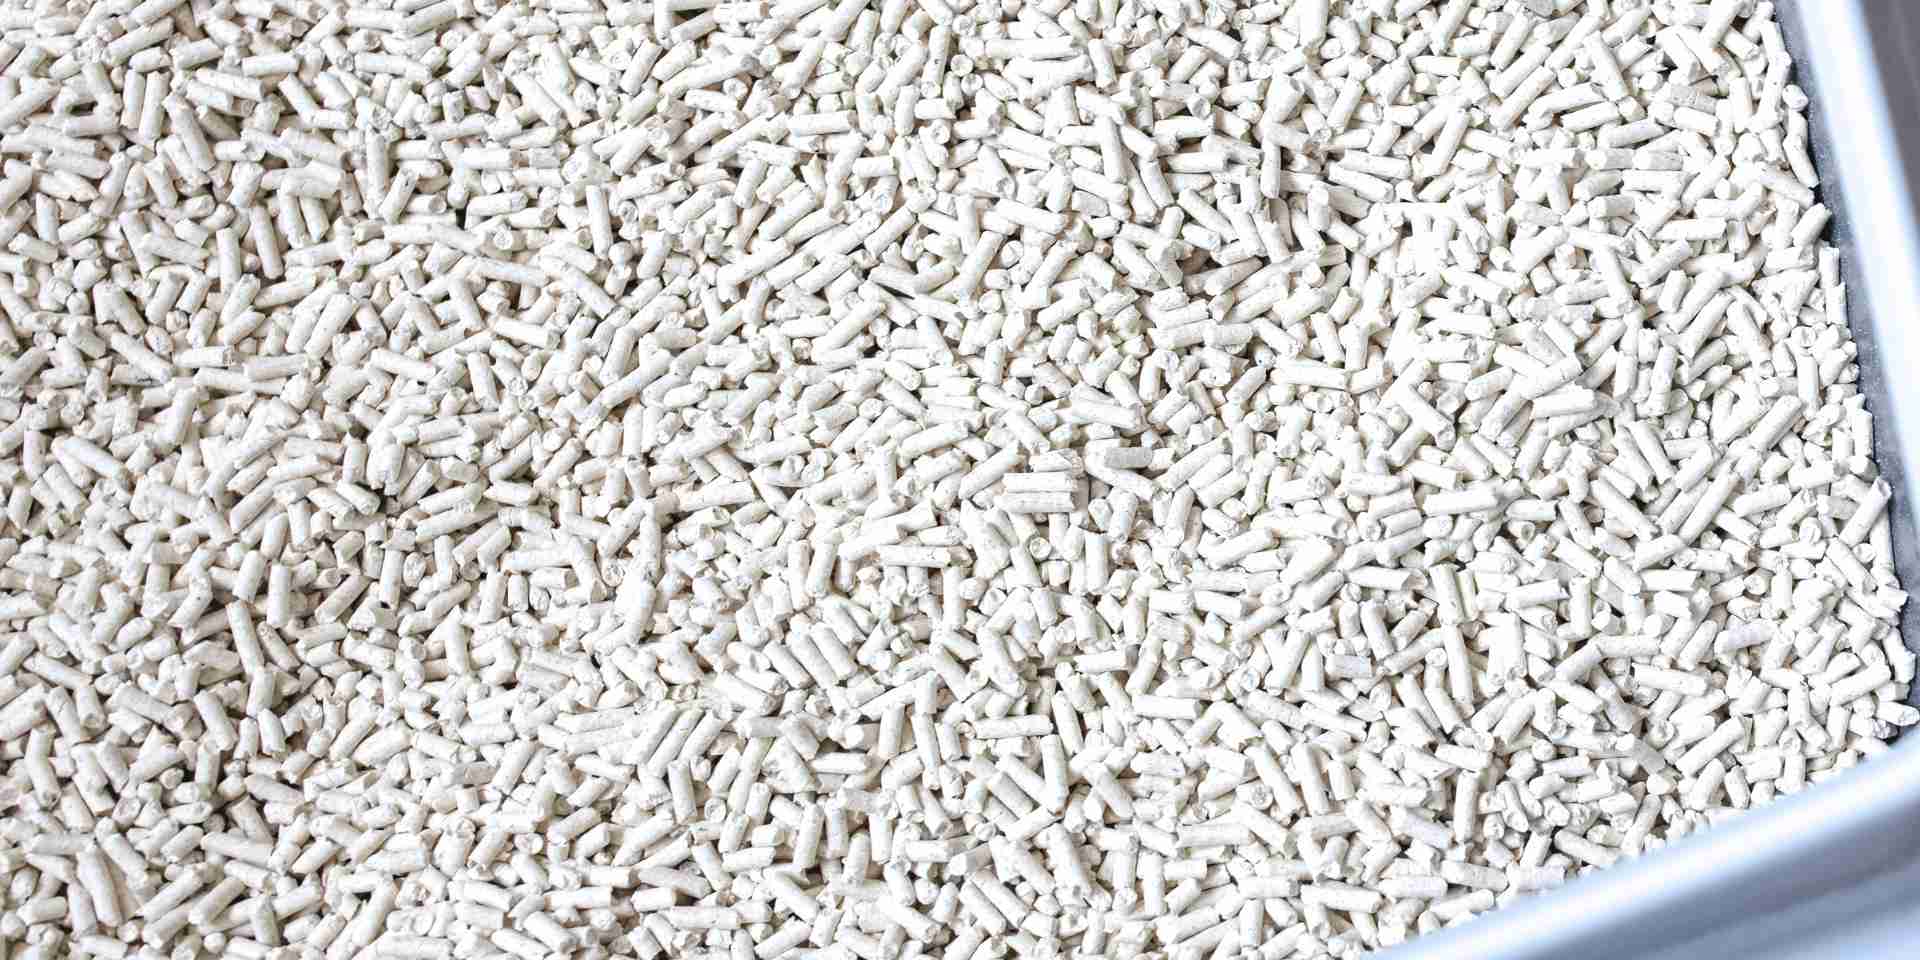 Close-up of tofu cat litter pellets in a litter box, highlighting the final eco-friendly product made from the soybeans